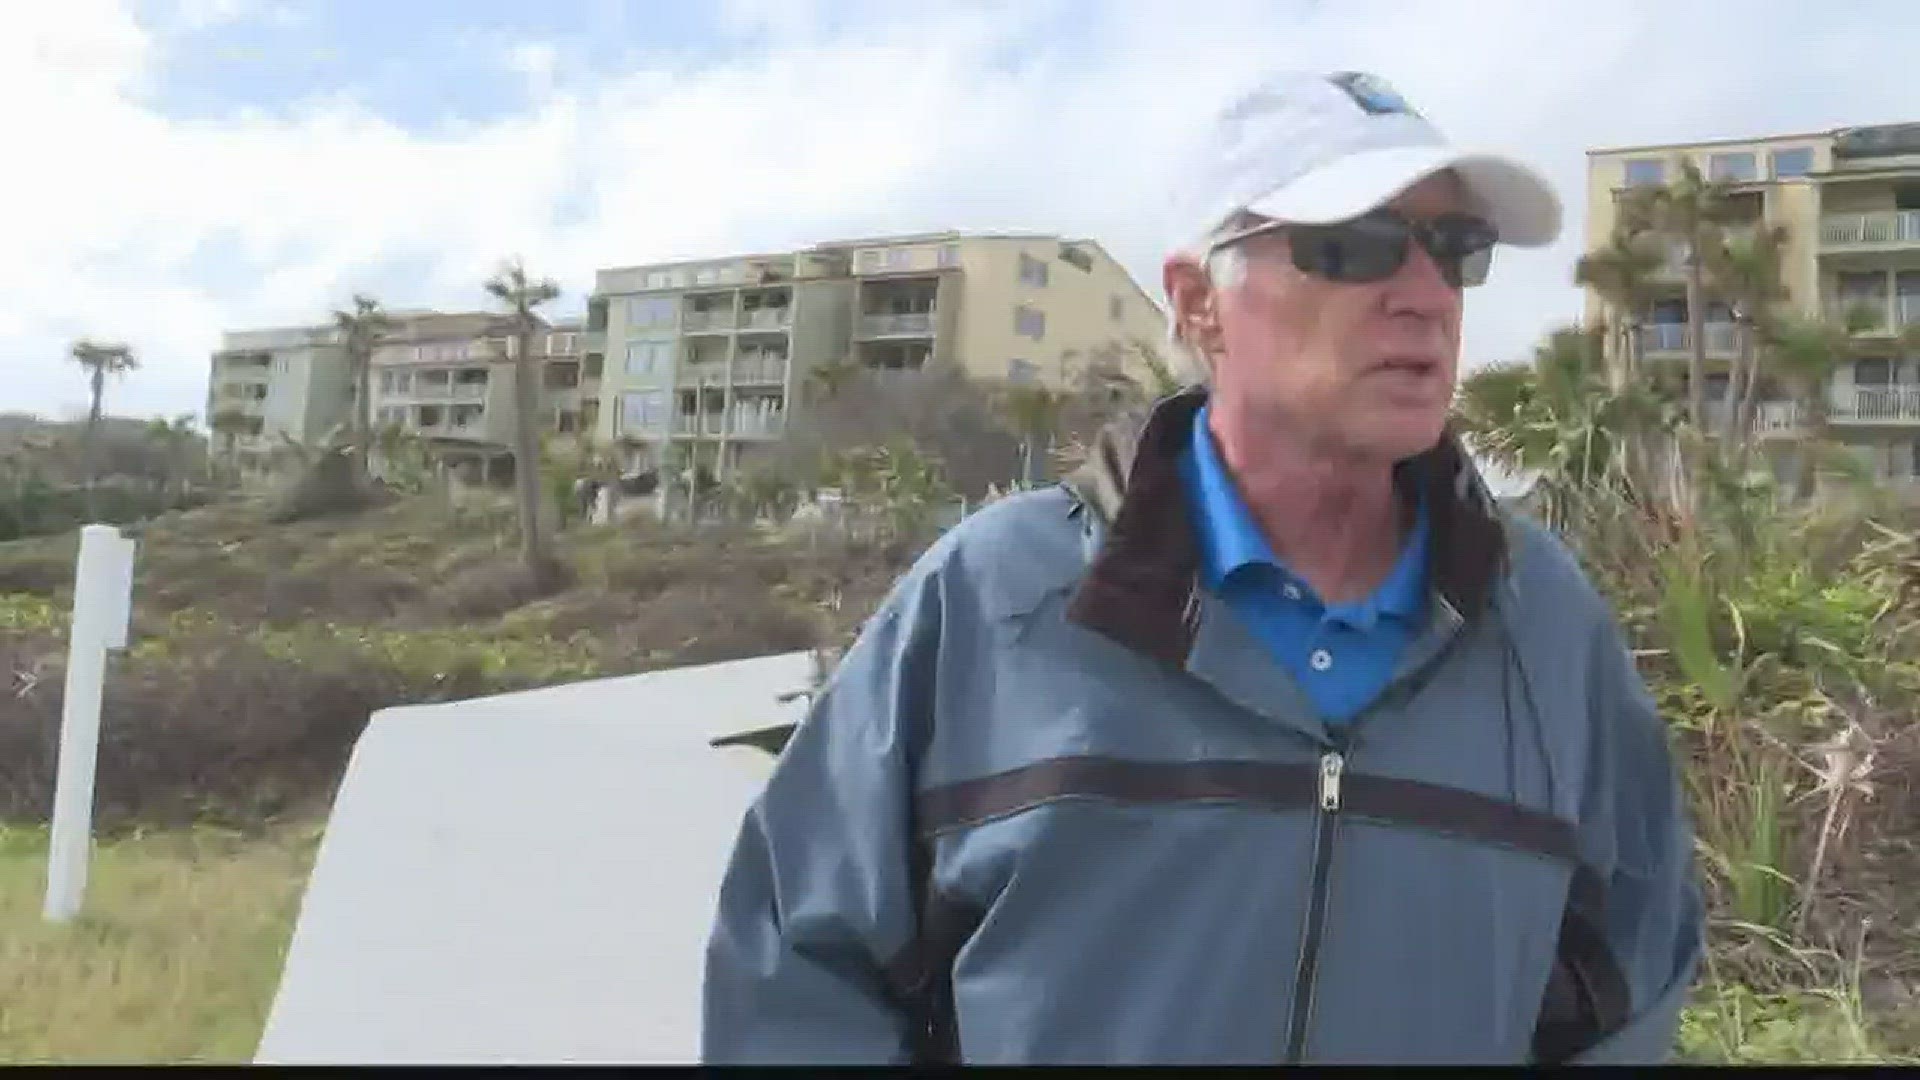 The Ocean Links Golf Course in Amelia Island closed down for good, but homeowners worry sudden construction will devalue their homes.